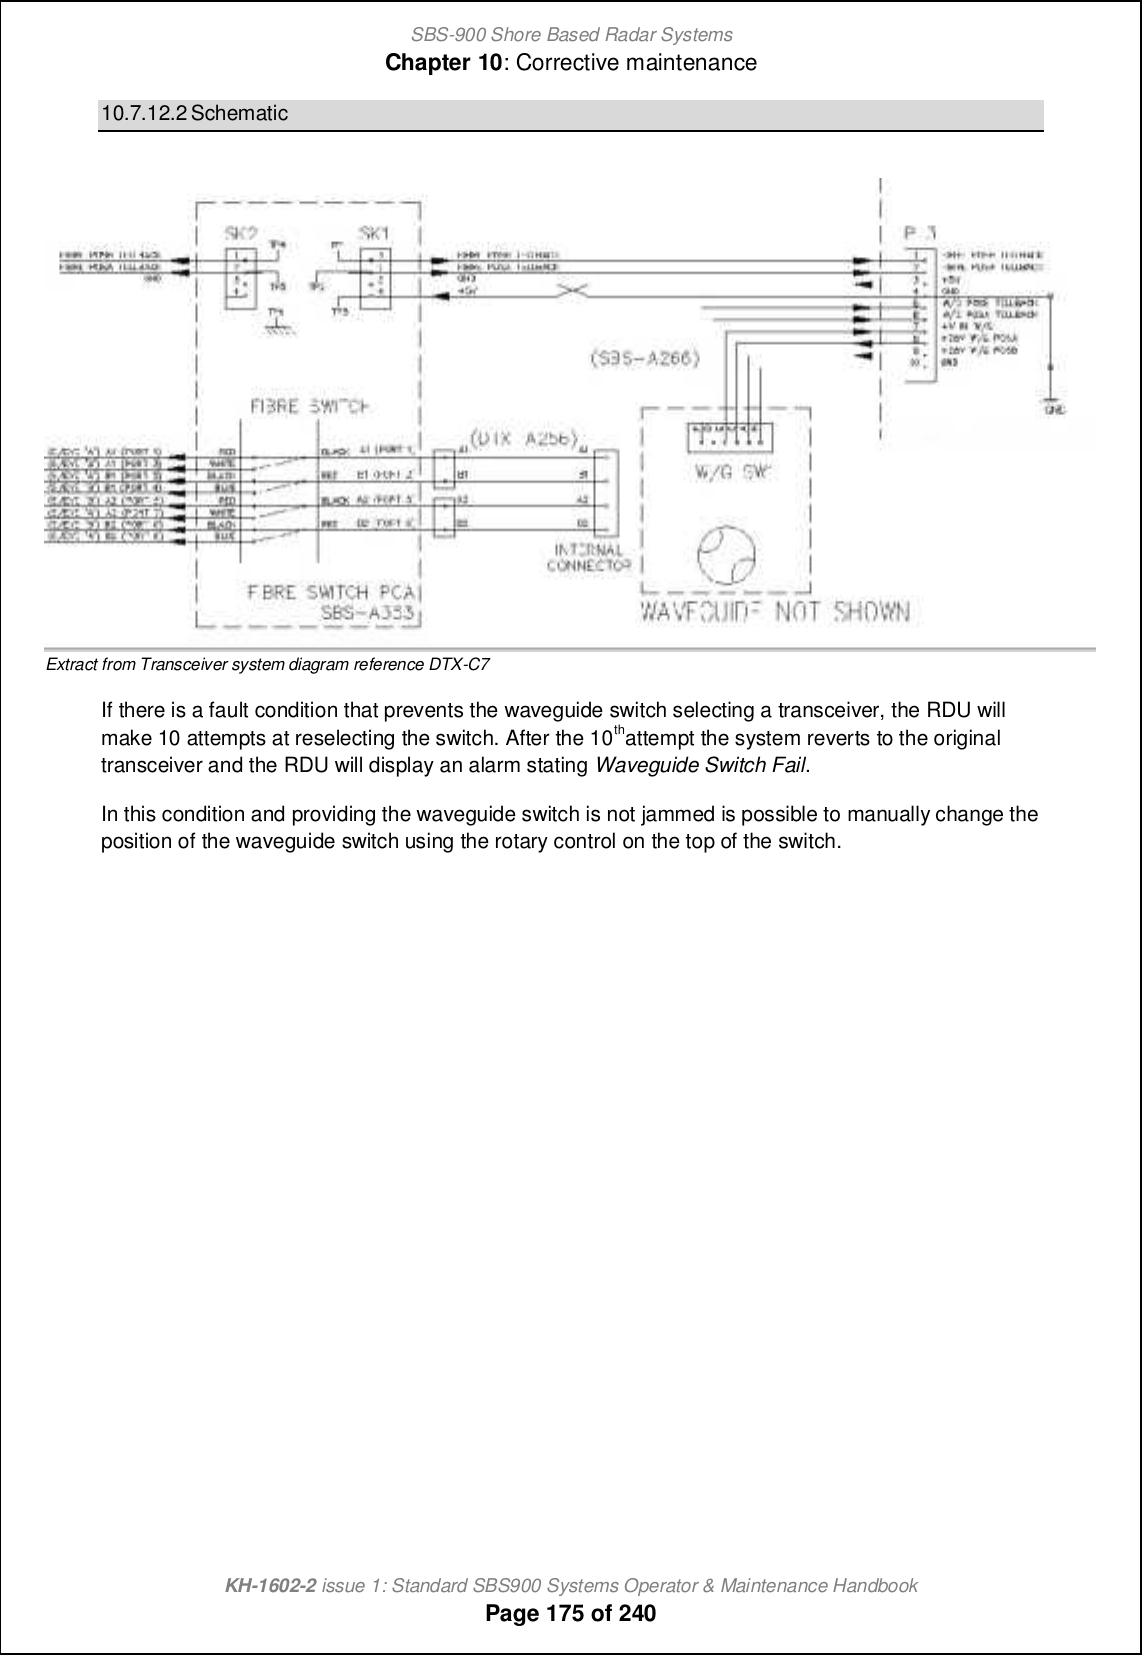 SBS-900 Shore Based Radar SystemsChapter 10: Corrective maintenanceKH-1602-2 issue 1: Standard SBS900 Systems Operator &amp; Maintenance HandbookPage 175 of 24010.7.12.2 SchematicExtract from Transceiver system diagram reference DTX-C7If there is a fault condition that prevents the waveguide switch selecting a transceiver, the RDU willmake 10 attempts at reselecting the switch. After the 10thattempt the system reverts to the originaltransceiver and the RDU will display an alarm stating Waveguide Switch Fail.In this condition and providing the waveguide switch is not jammed is possible to manually change theposition of the waveguide switch using the rotary control on the top of the switch.